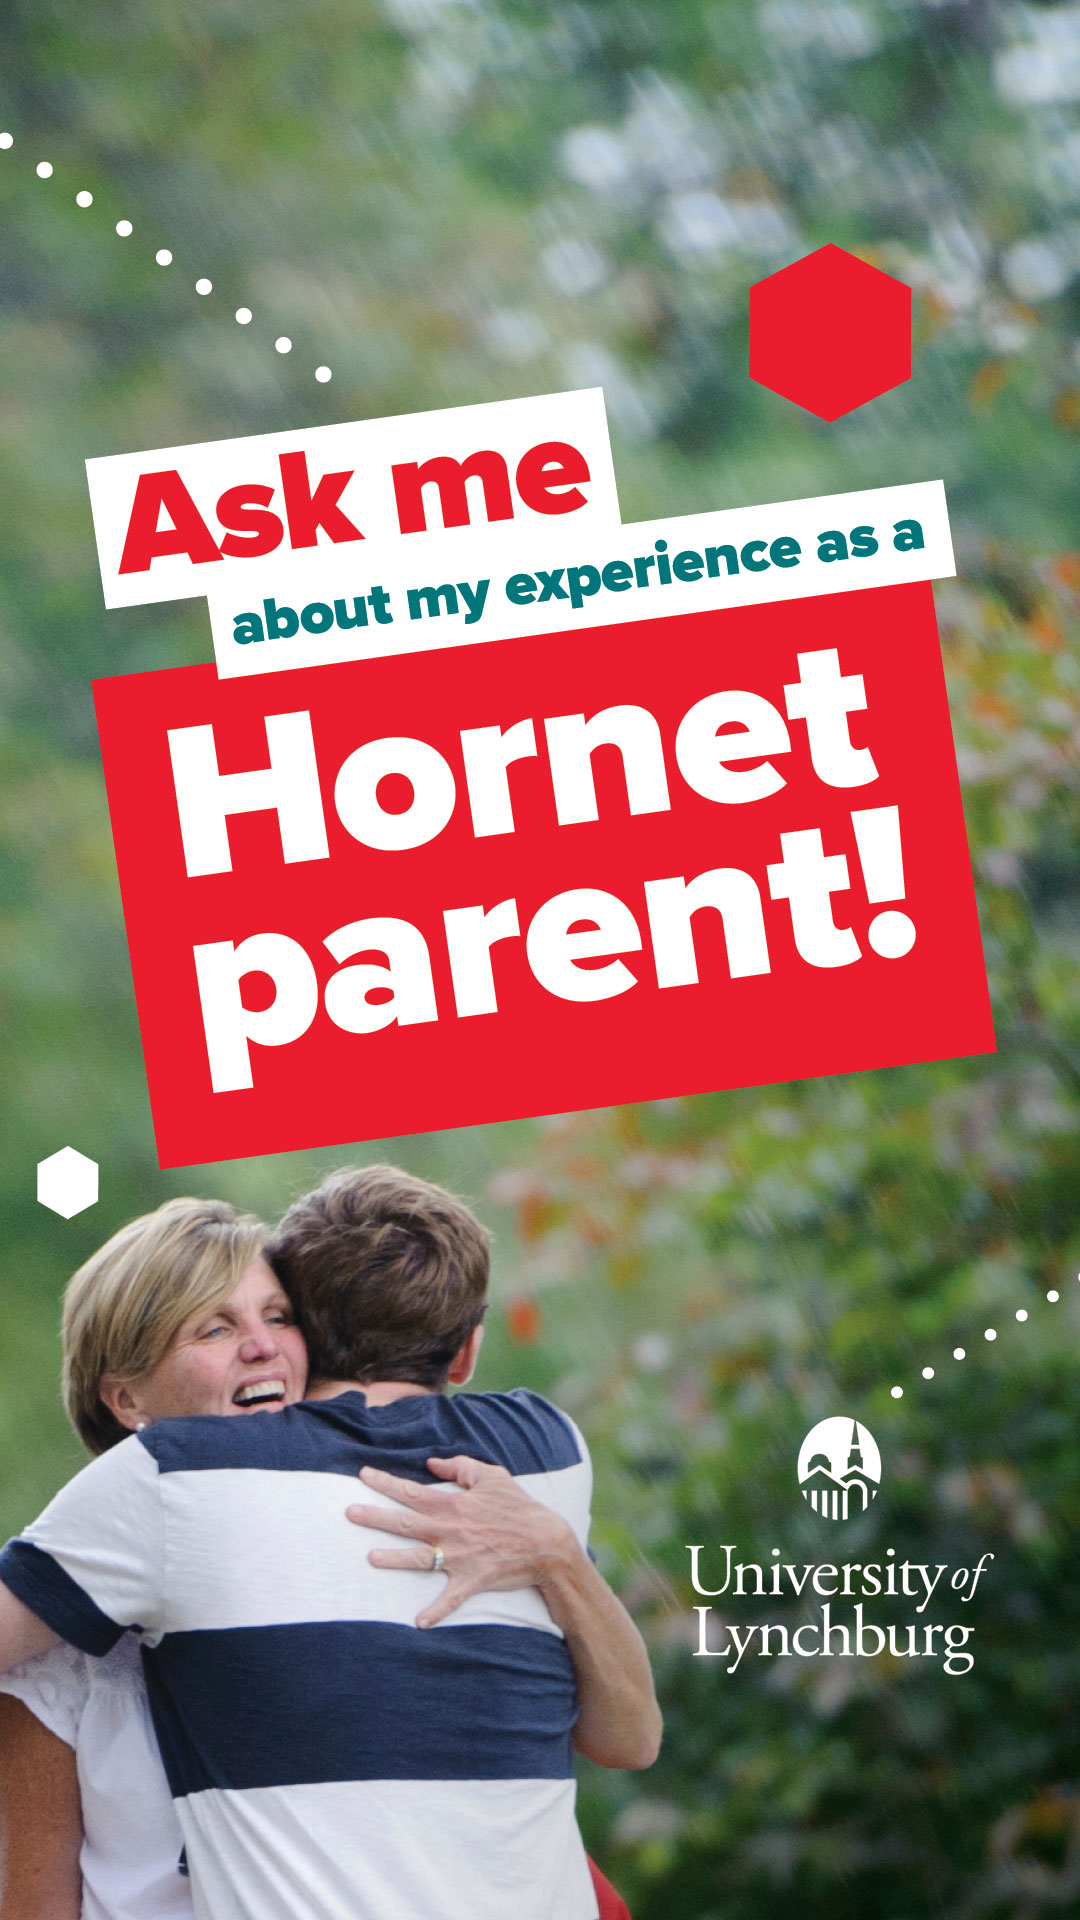 A photo of a mother and son hugging, with the following text: Ask me about my experience as a Hornet parent! University of Lynchburg